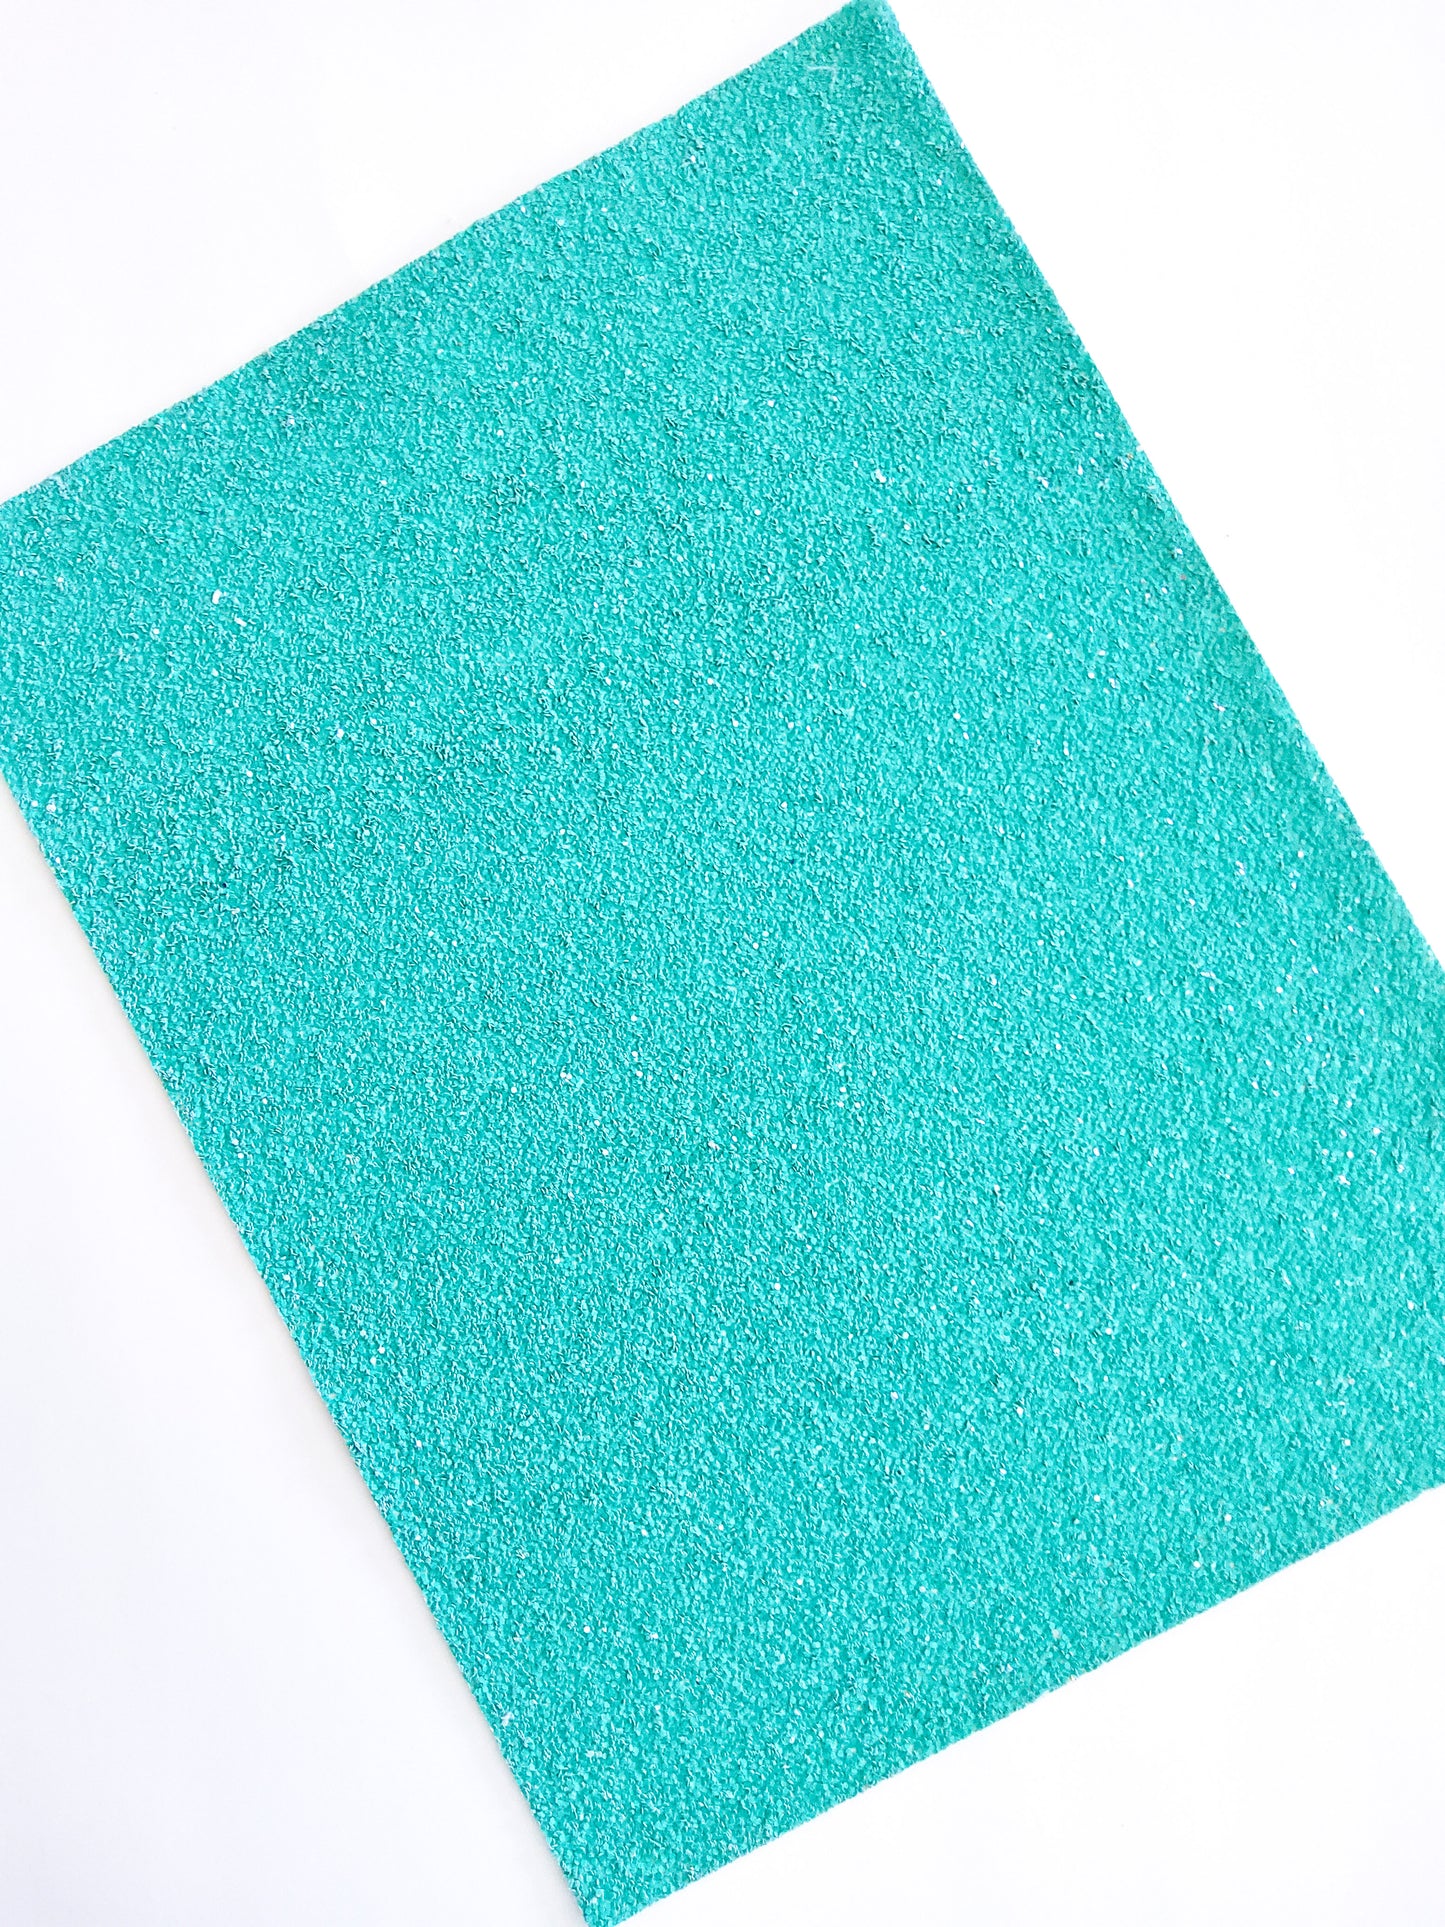 Turquoise Waters Chunky Glitter 9x12 faux leather sheet